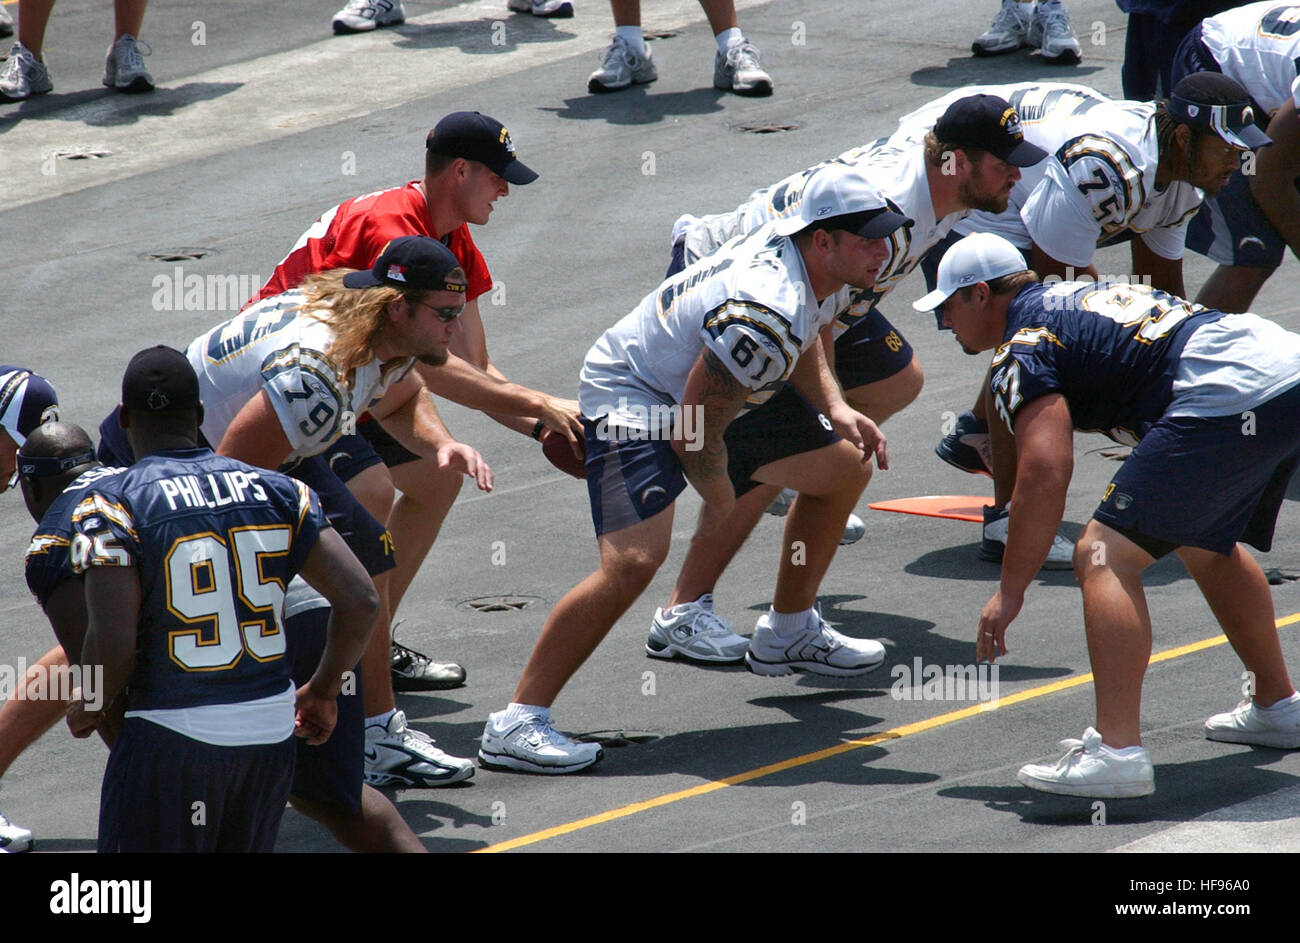 060811-N-4776G-075   San Diego, Calif. (Aug. 11, 2006) – Starting Quarterback for the National Football League (NFL) San Diego Chargers, Philip Rivers (17), takes the snap from Center, Nick Hardwick (61), during a light practice on the flight deck aboard USS Ronald Reagan (CVN 76). The Chargers held practice aboard the Navy's newest nuclear powered aircraft carrier in preparation for their first pre-season game against the Green Bay Packers, August 12. During pre-game ceremonies, a military appreciation game will involve Ronald Reagan Sailors and the unfurling of a giant American display flag. Stock Photo